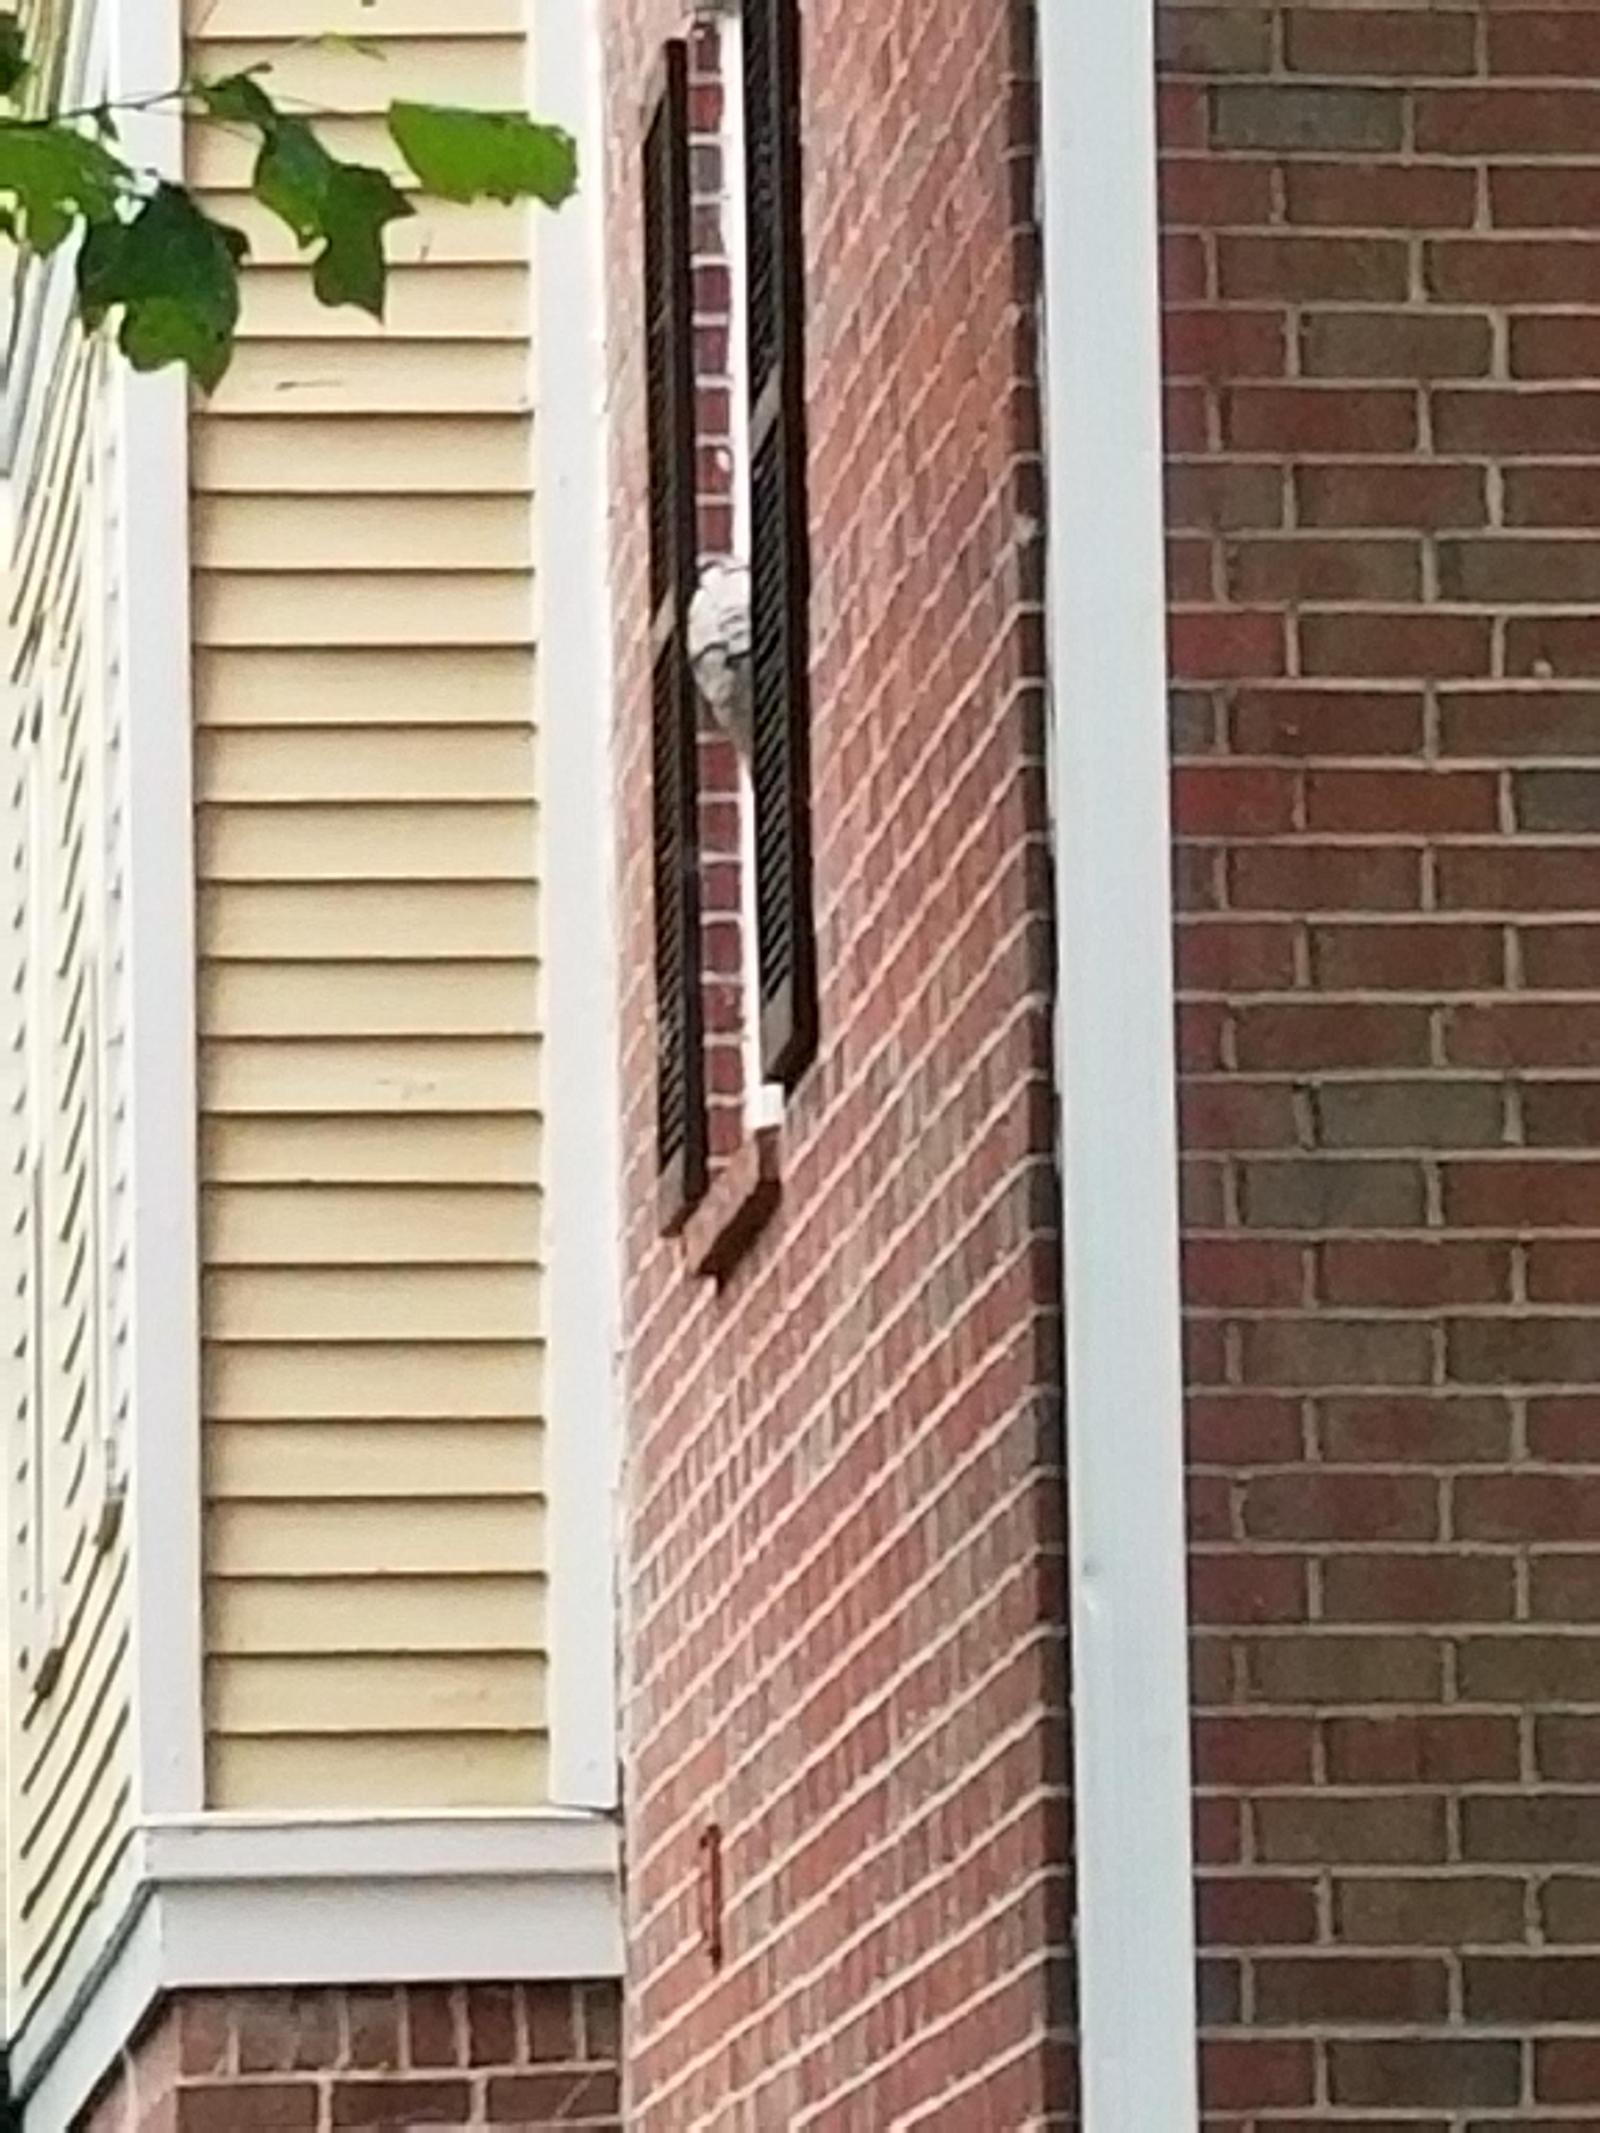 Continuation of the hive on the window - Longpost, Hornet, GIF, Nest